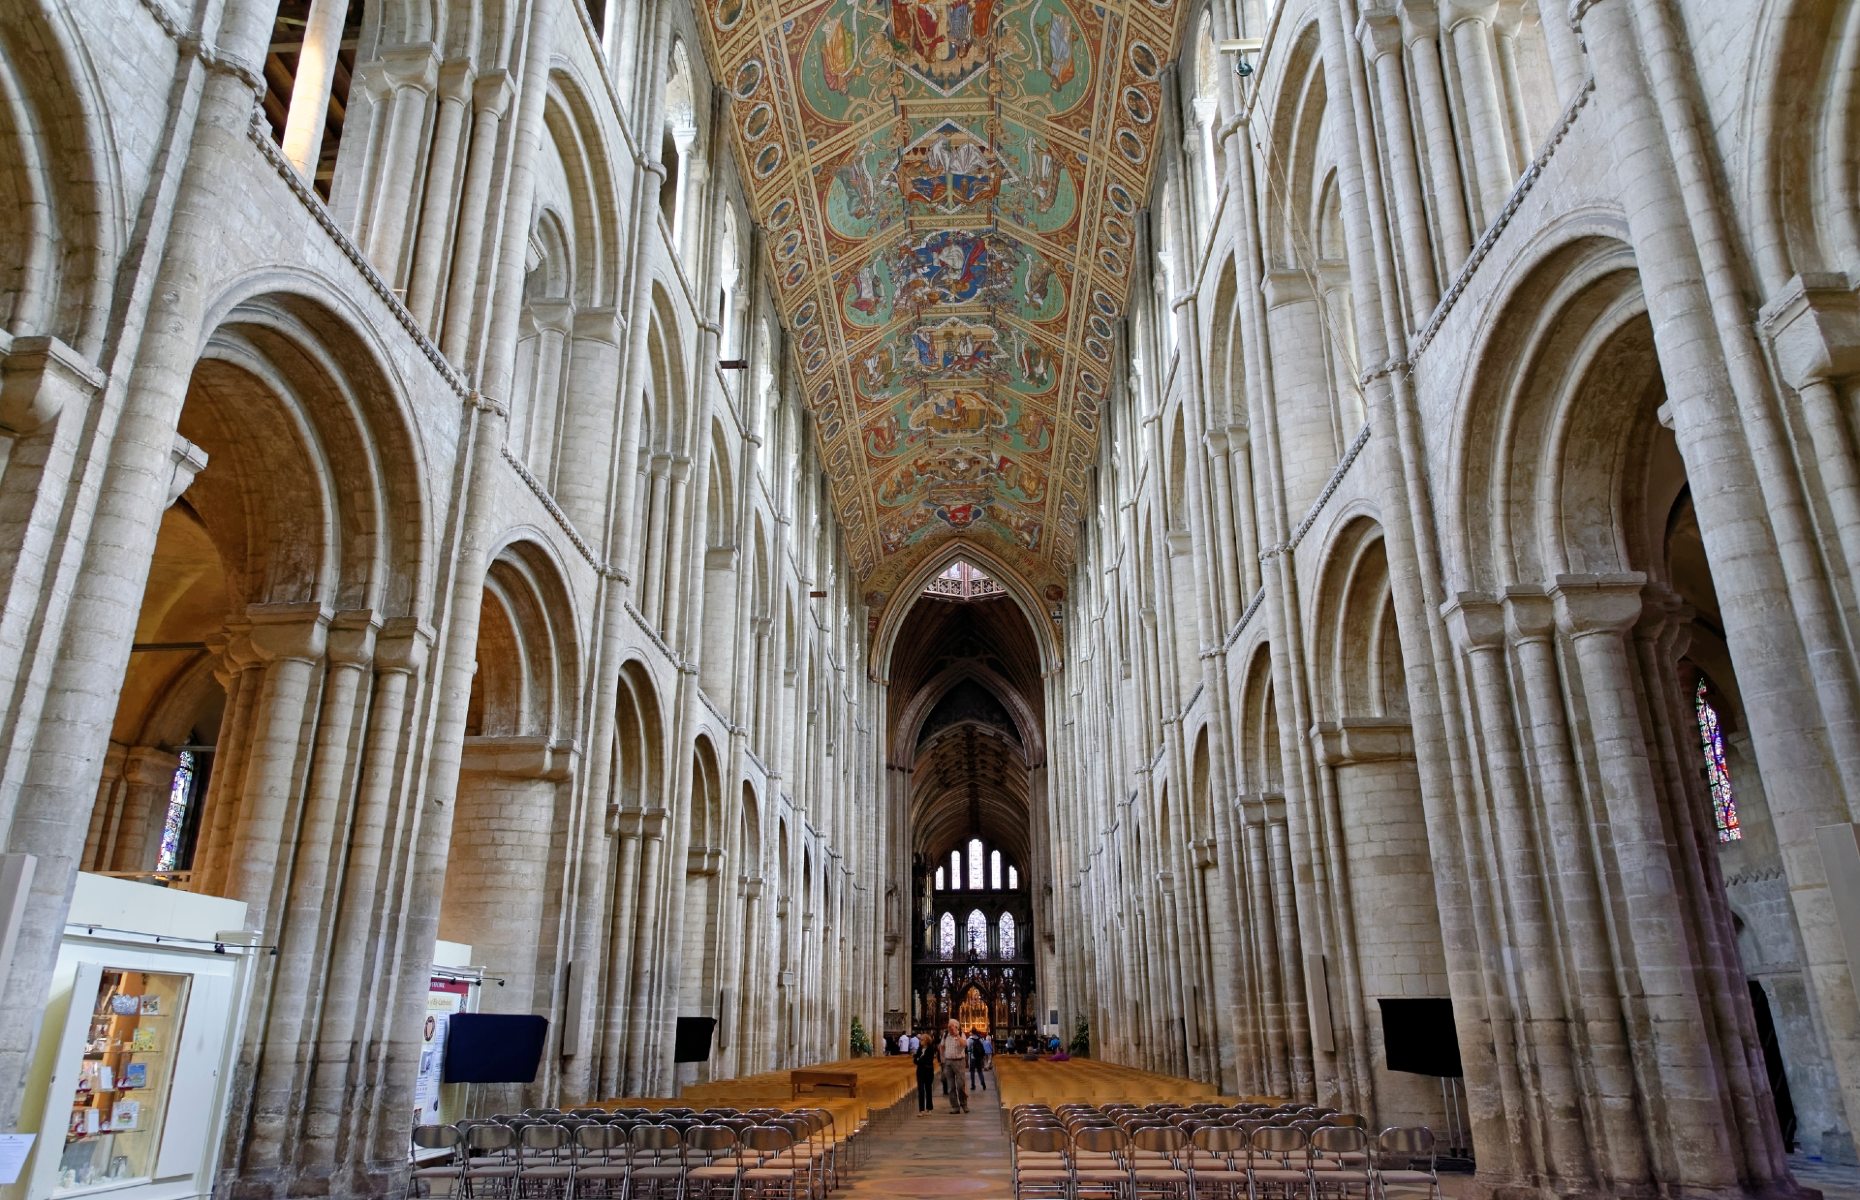 Inside Ely Cathedral (Image: Angelina Dimitrova/Shutterstock)